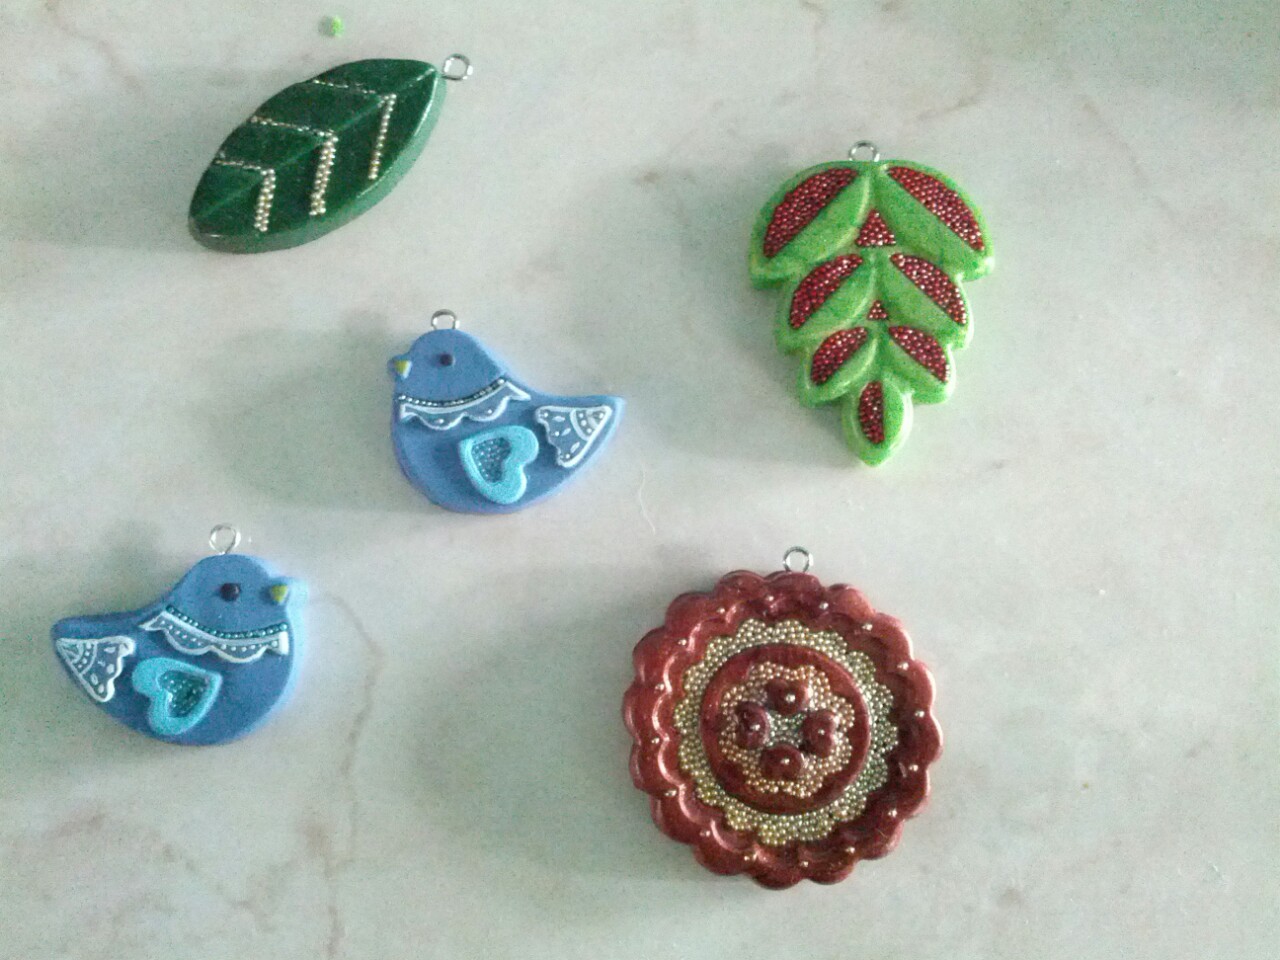 More pendants!  These are polymer clay with details in carefully placed micro beads